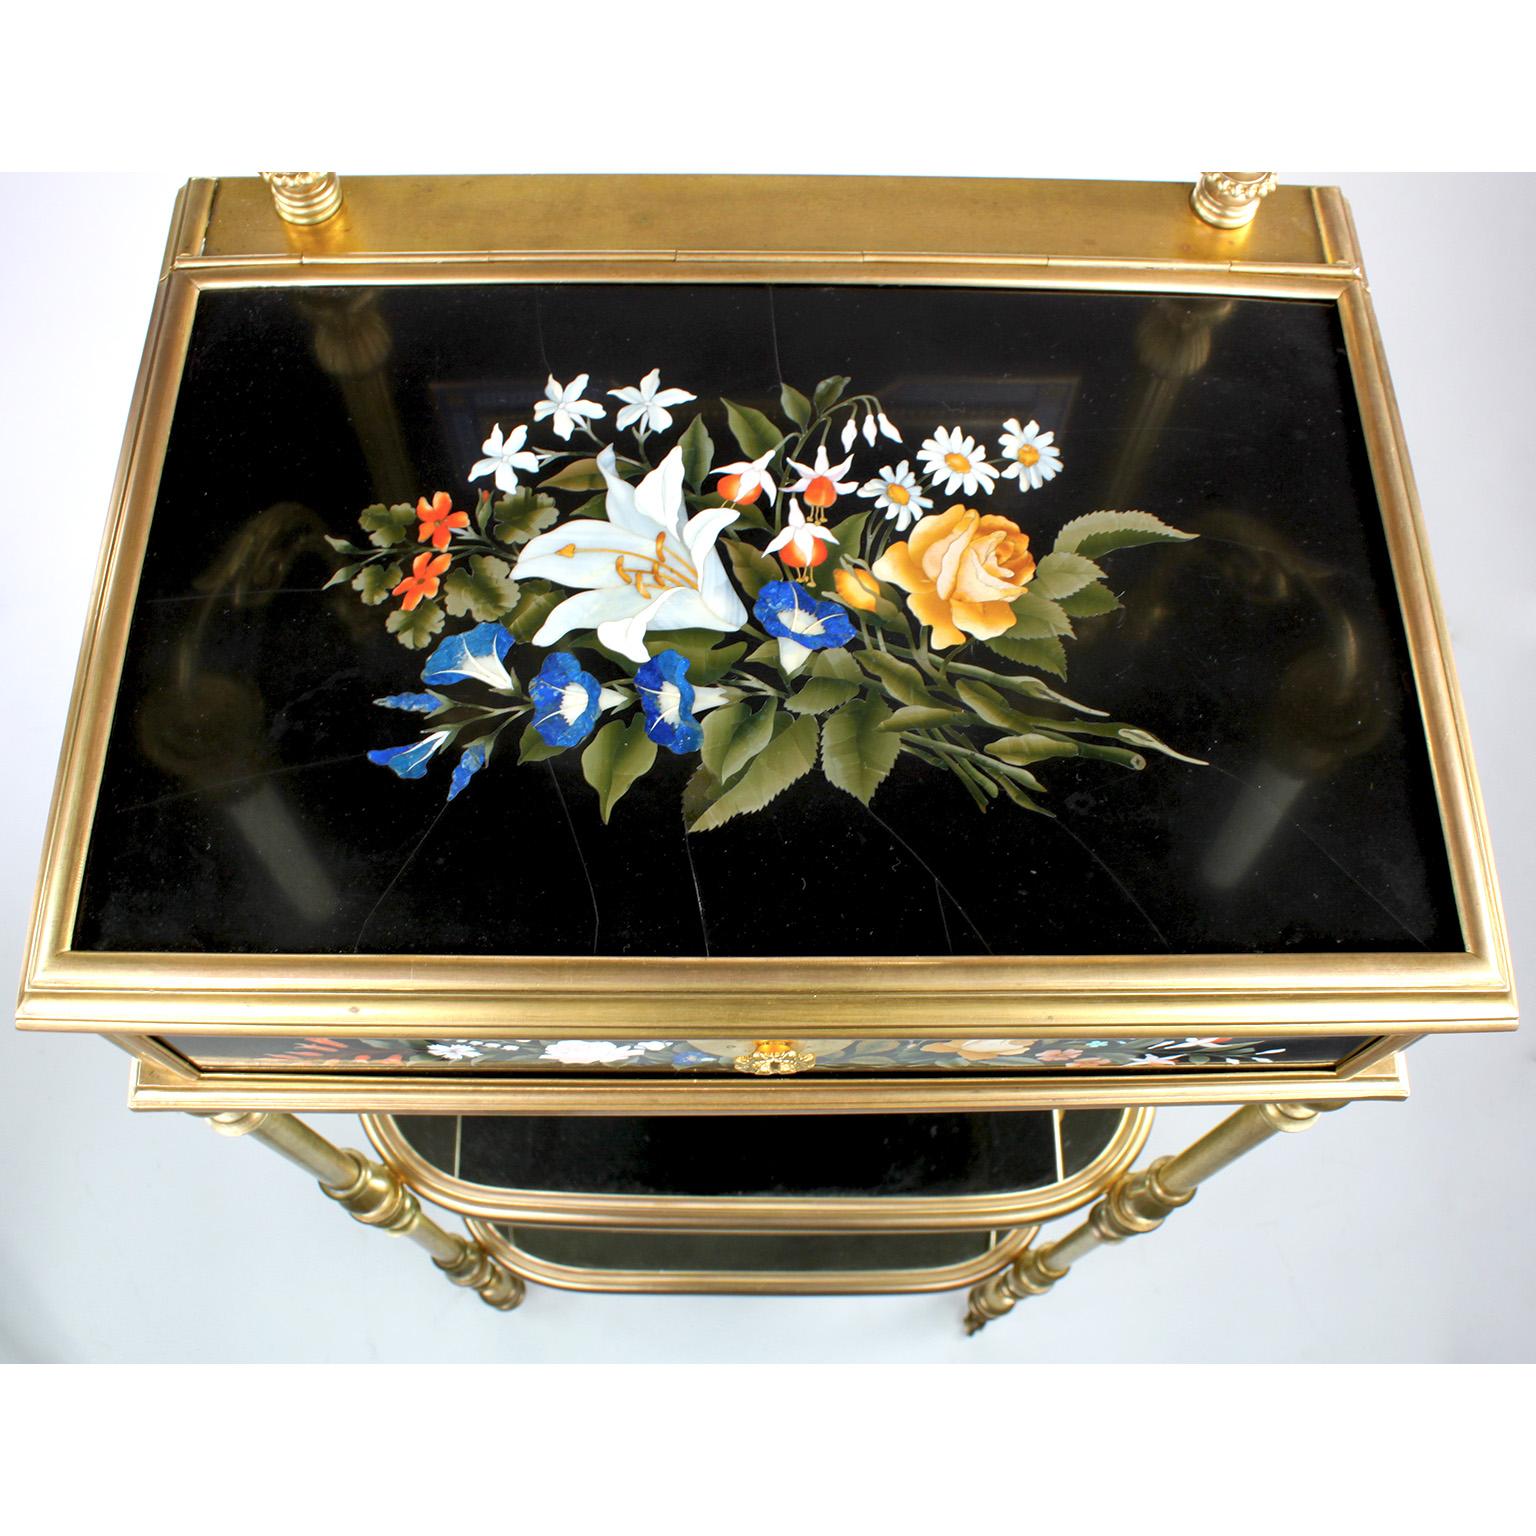 French 19th Century Gilt-Bronze and Pietra Dura Vanity Stand, Attr. Tahan, Paris In Good Condition For Sale In Los Angeles, CA